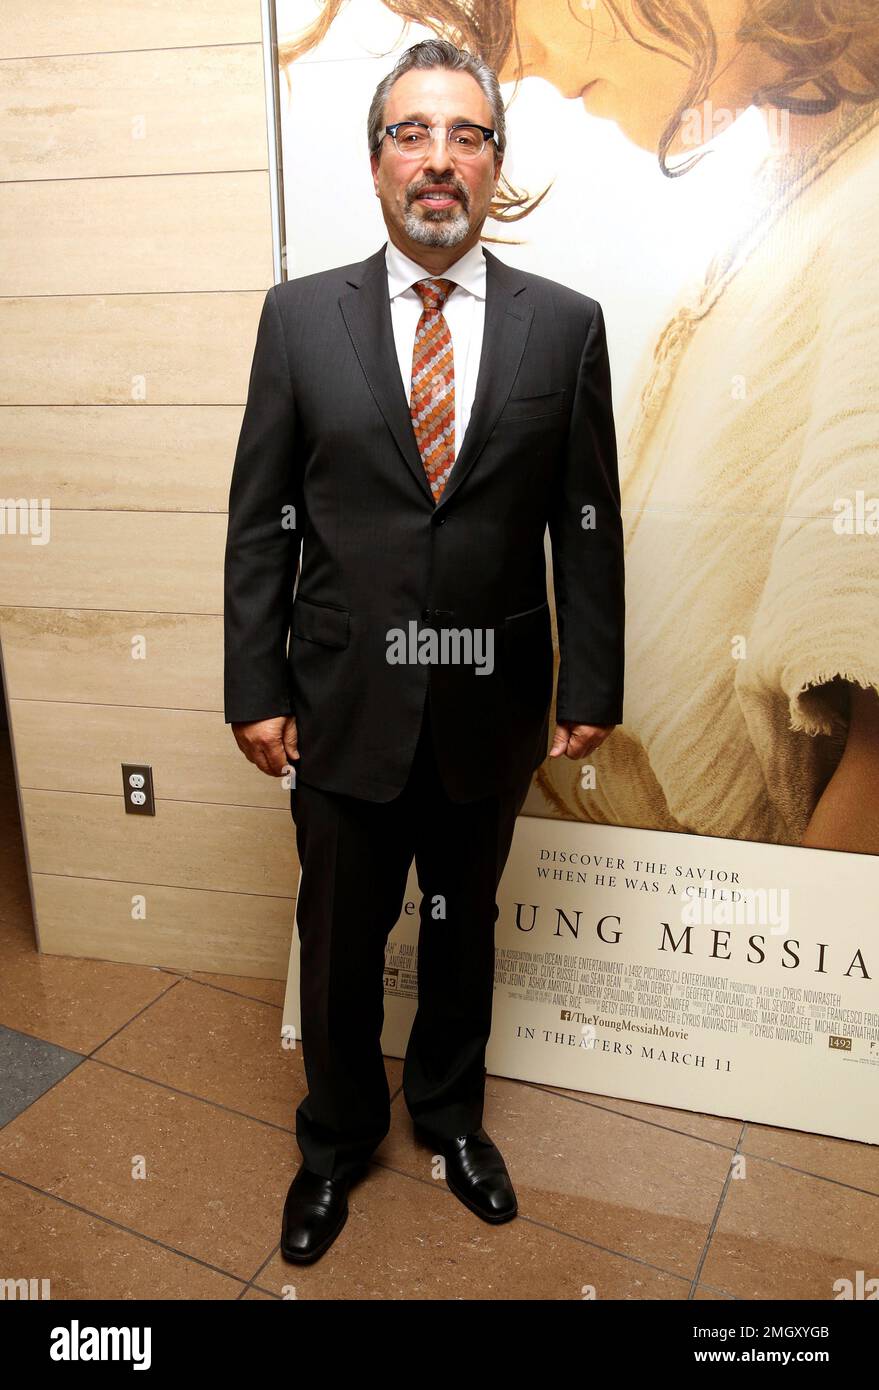 Producer Michael Barnathan seen at the Focus Features "The Young Messiah" Screening at Cinemark Playa Vista on Thursday, March 10, 2016 in Los Angeles. (Blair Raughley via AP) Stock Photo